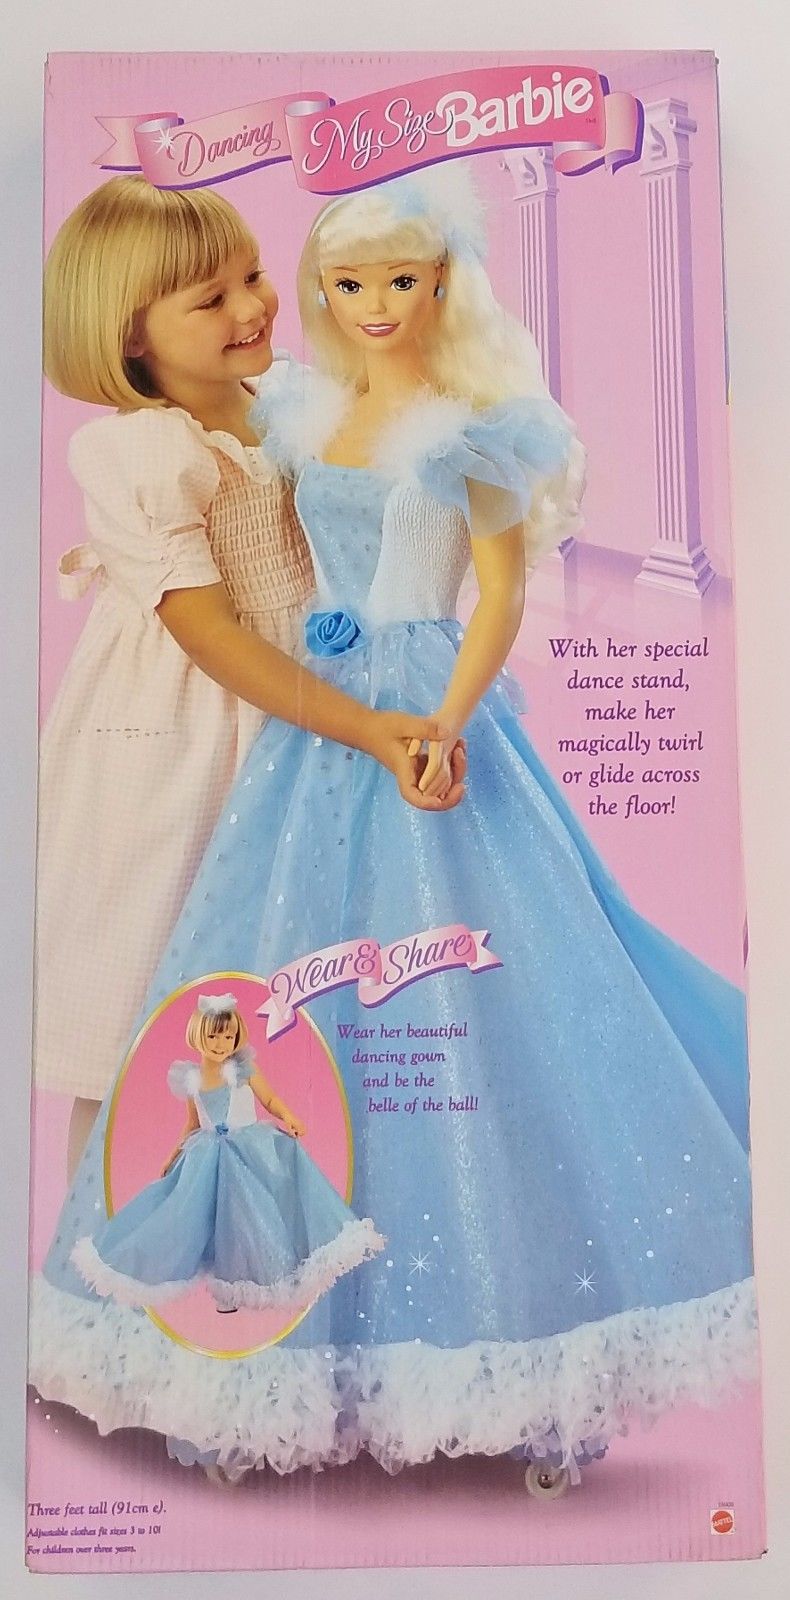 life size dolls from the 80s